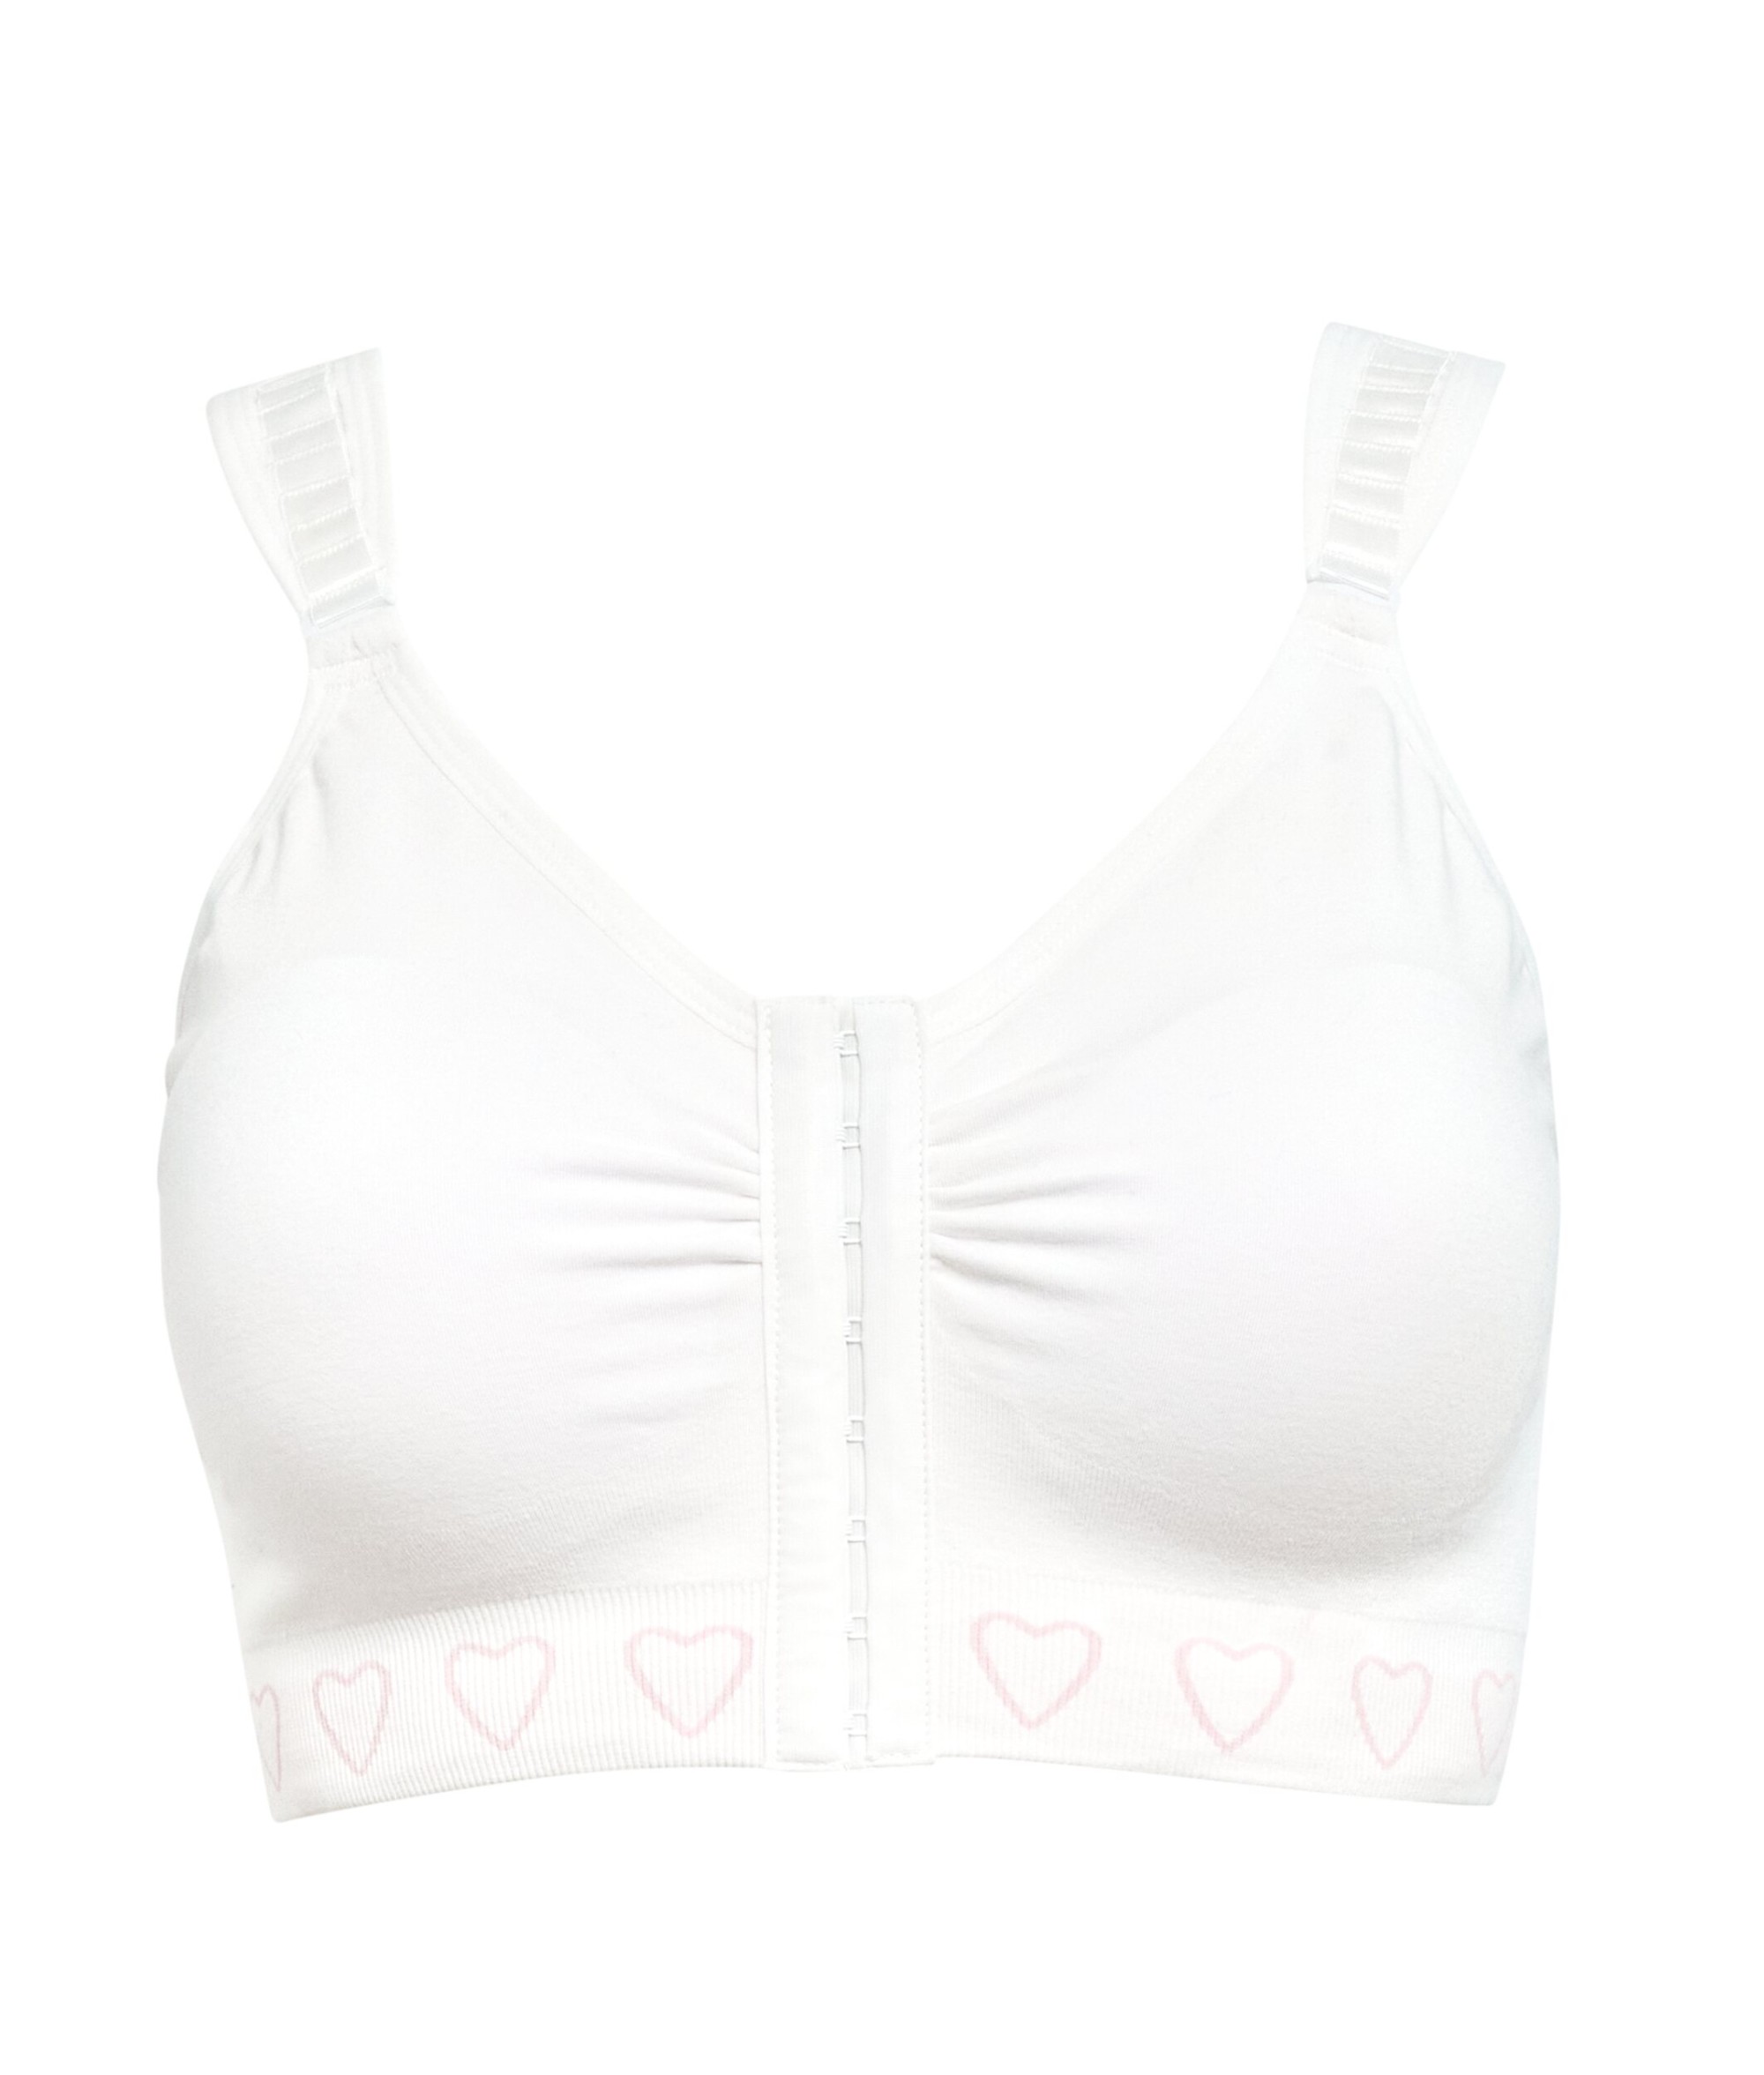 Post Mastectomy Occasion Wear - Choose the Right Mastectomy Bra